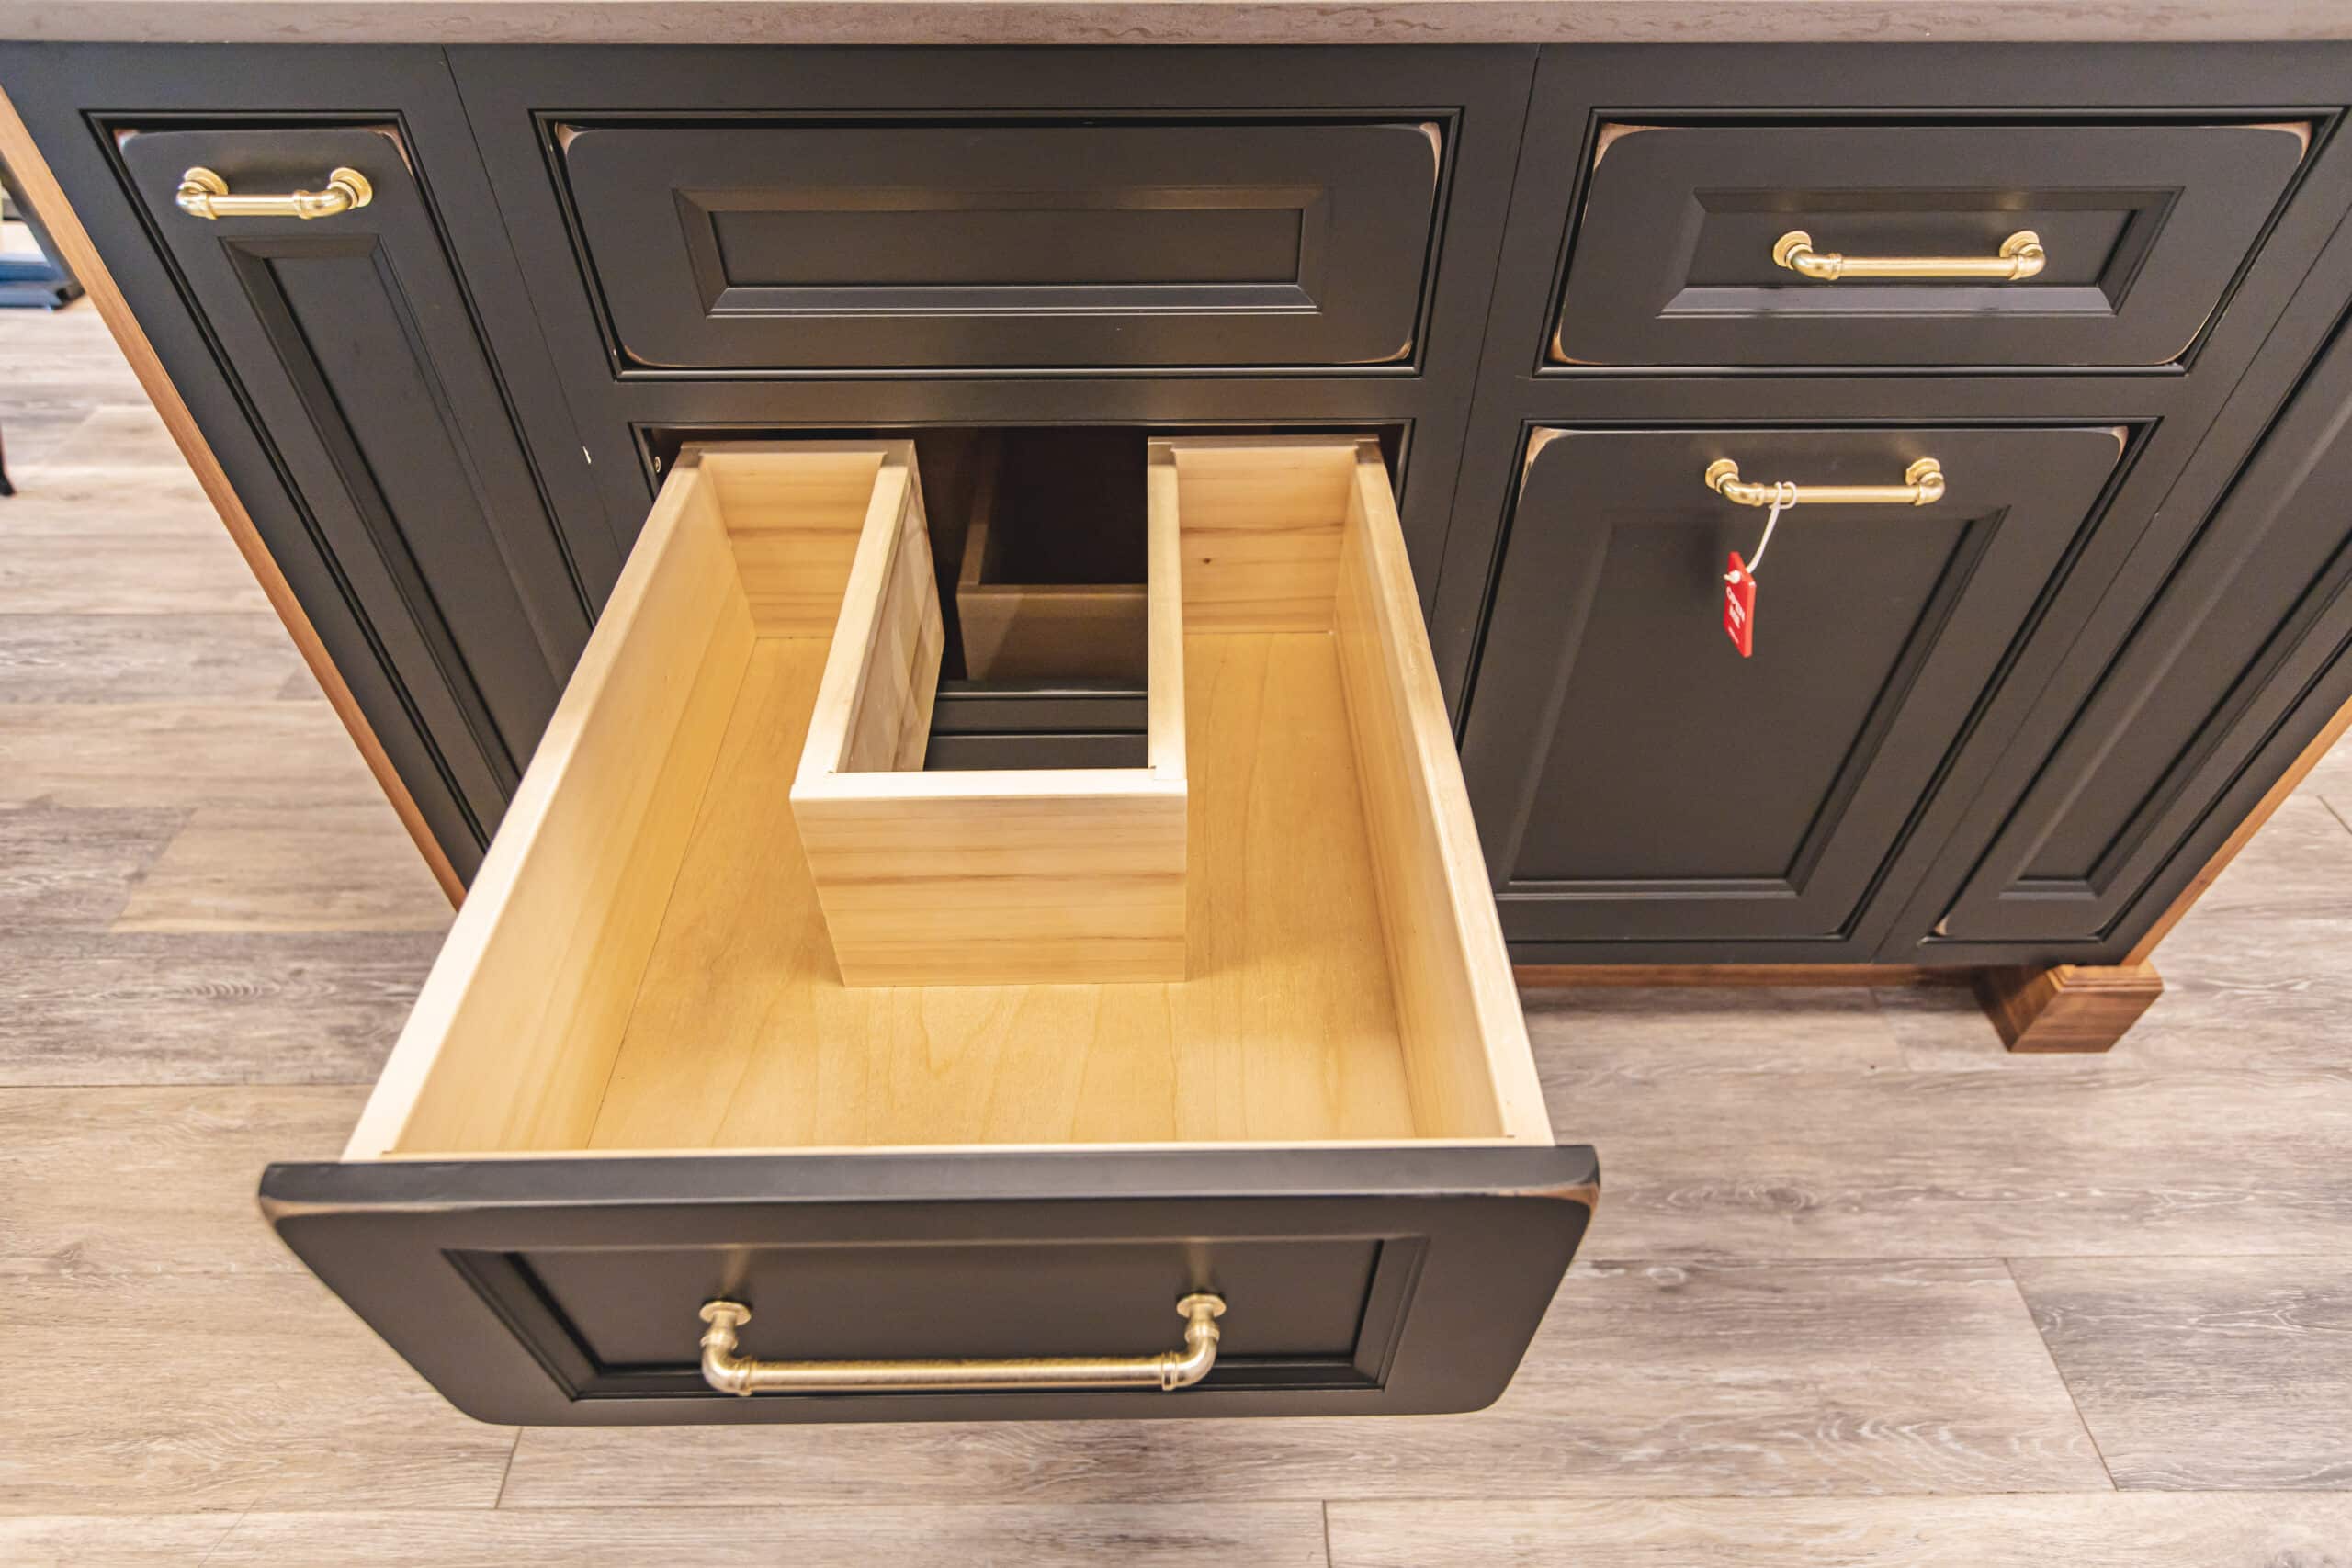 A cabinet drawer with a organized storage space